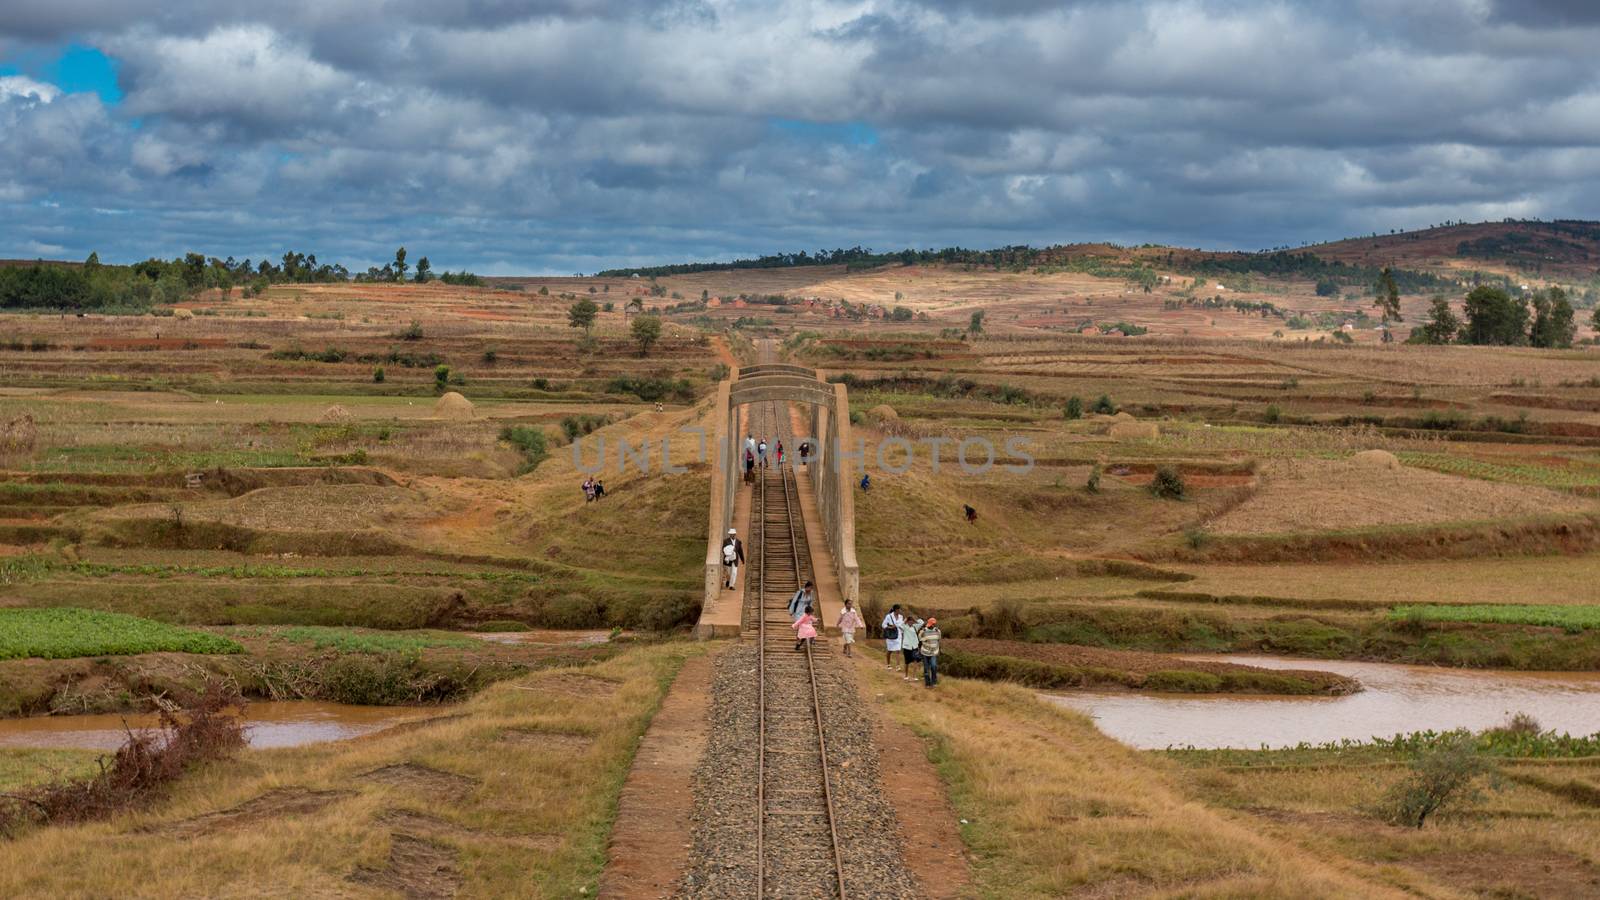 Malagasy people from the countryside cross a railroad bridge on the way to work and school on May 25, 2014 in Madagascar.